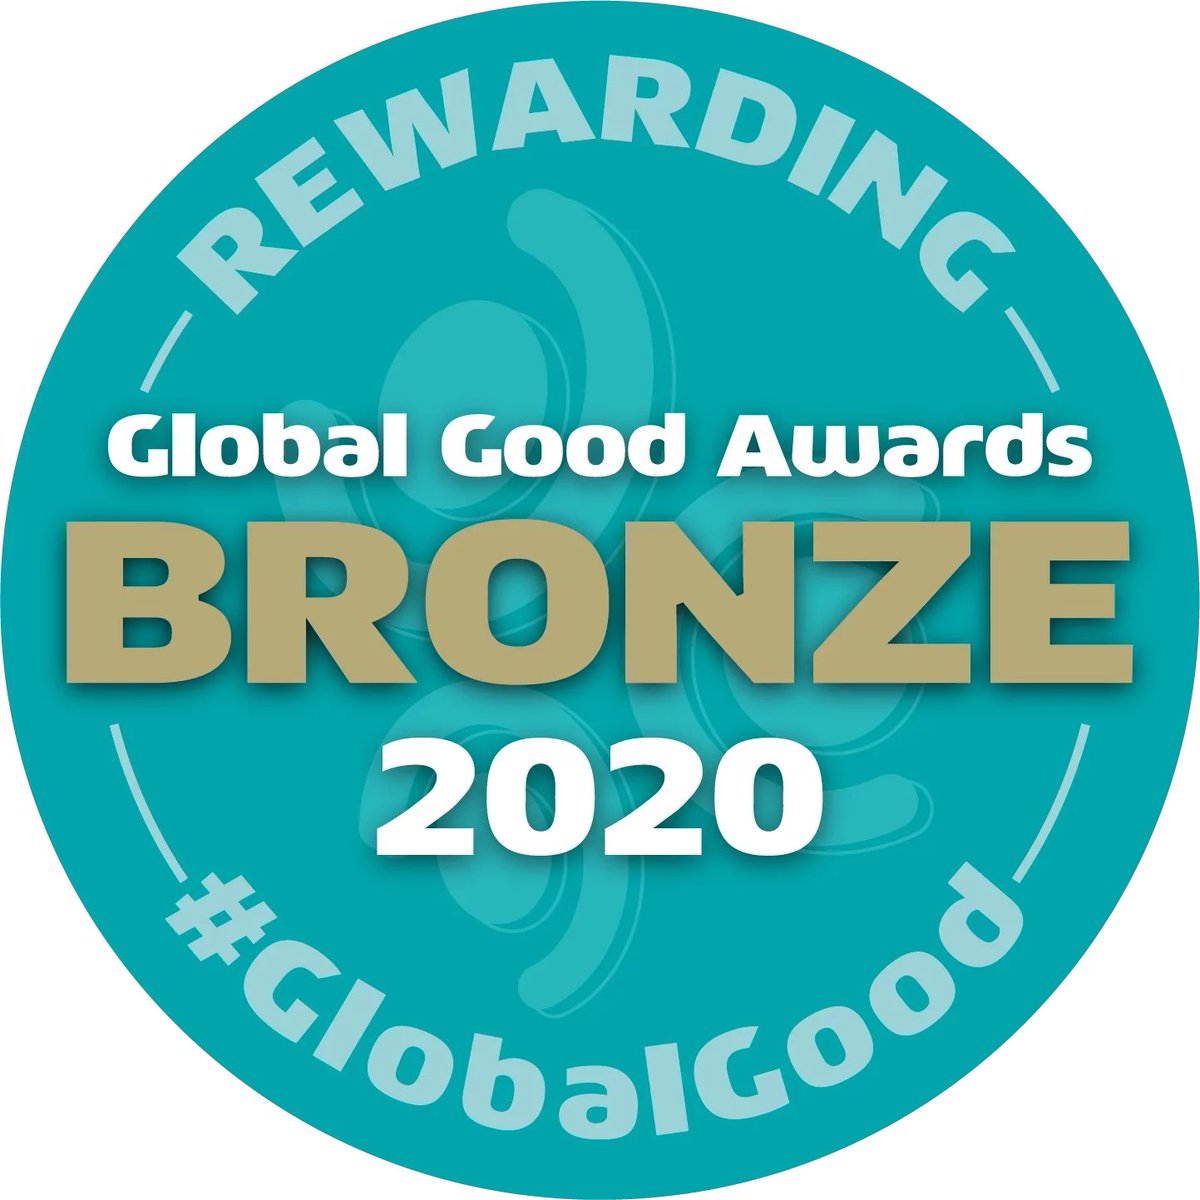 >>>
Winner of 2020 Silver @GlobalGoodAward in same category was @EcoboothUK — a #sustainableevents pioneer that transforms #plasticwaste.

Gold Winner was @totmorganic — whose #cotton + #reusable #periodcare is better for people + planet. 🌎 

Congrats to all winners + finalists!